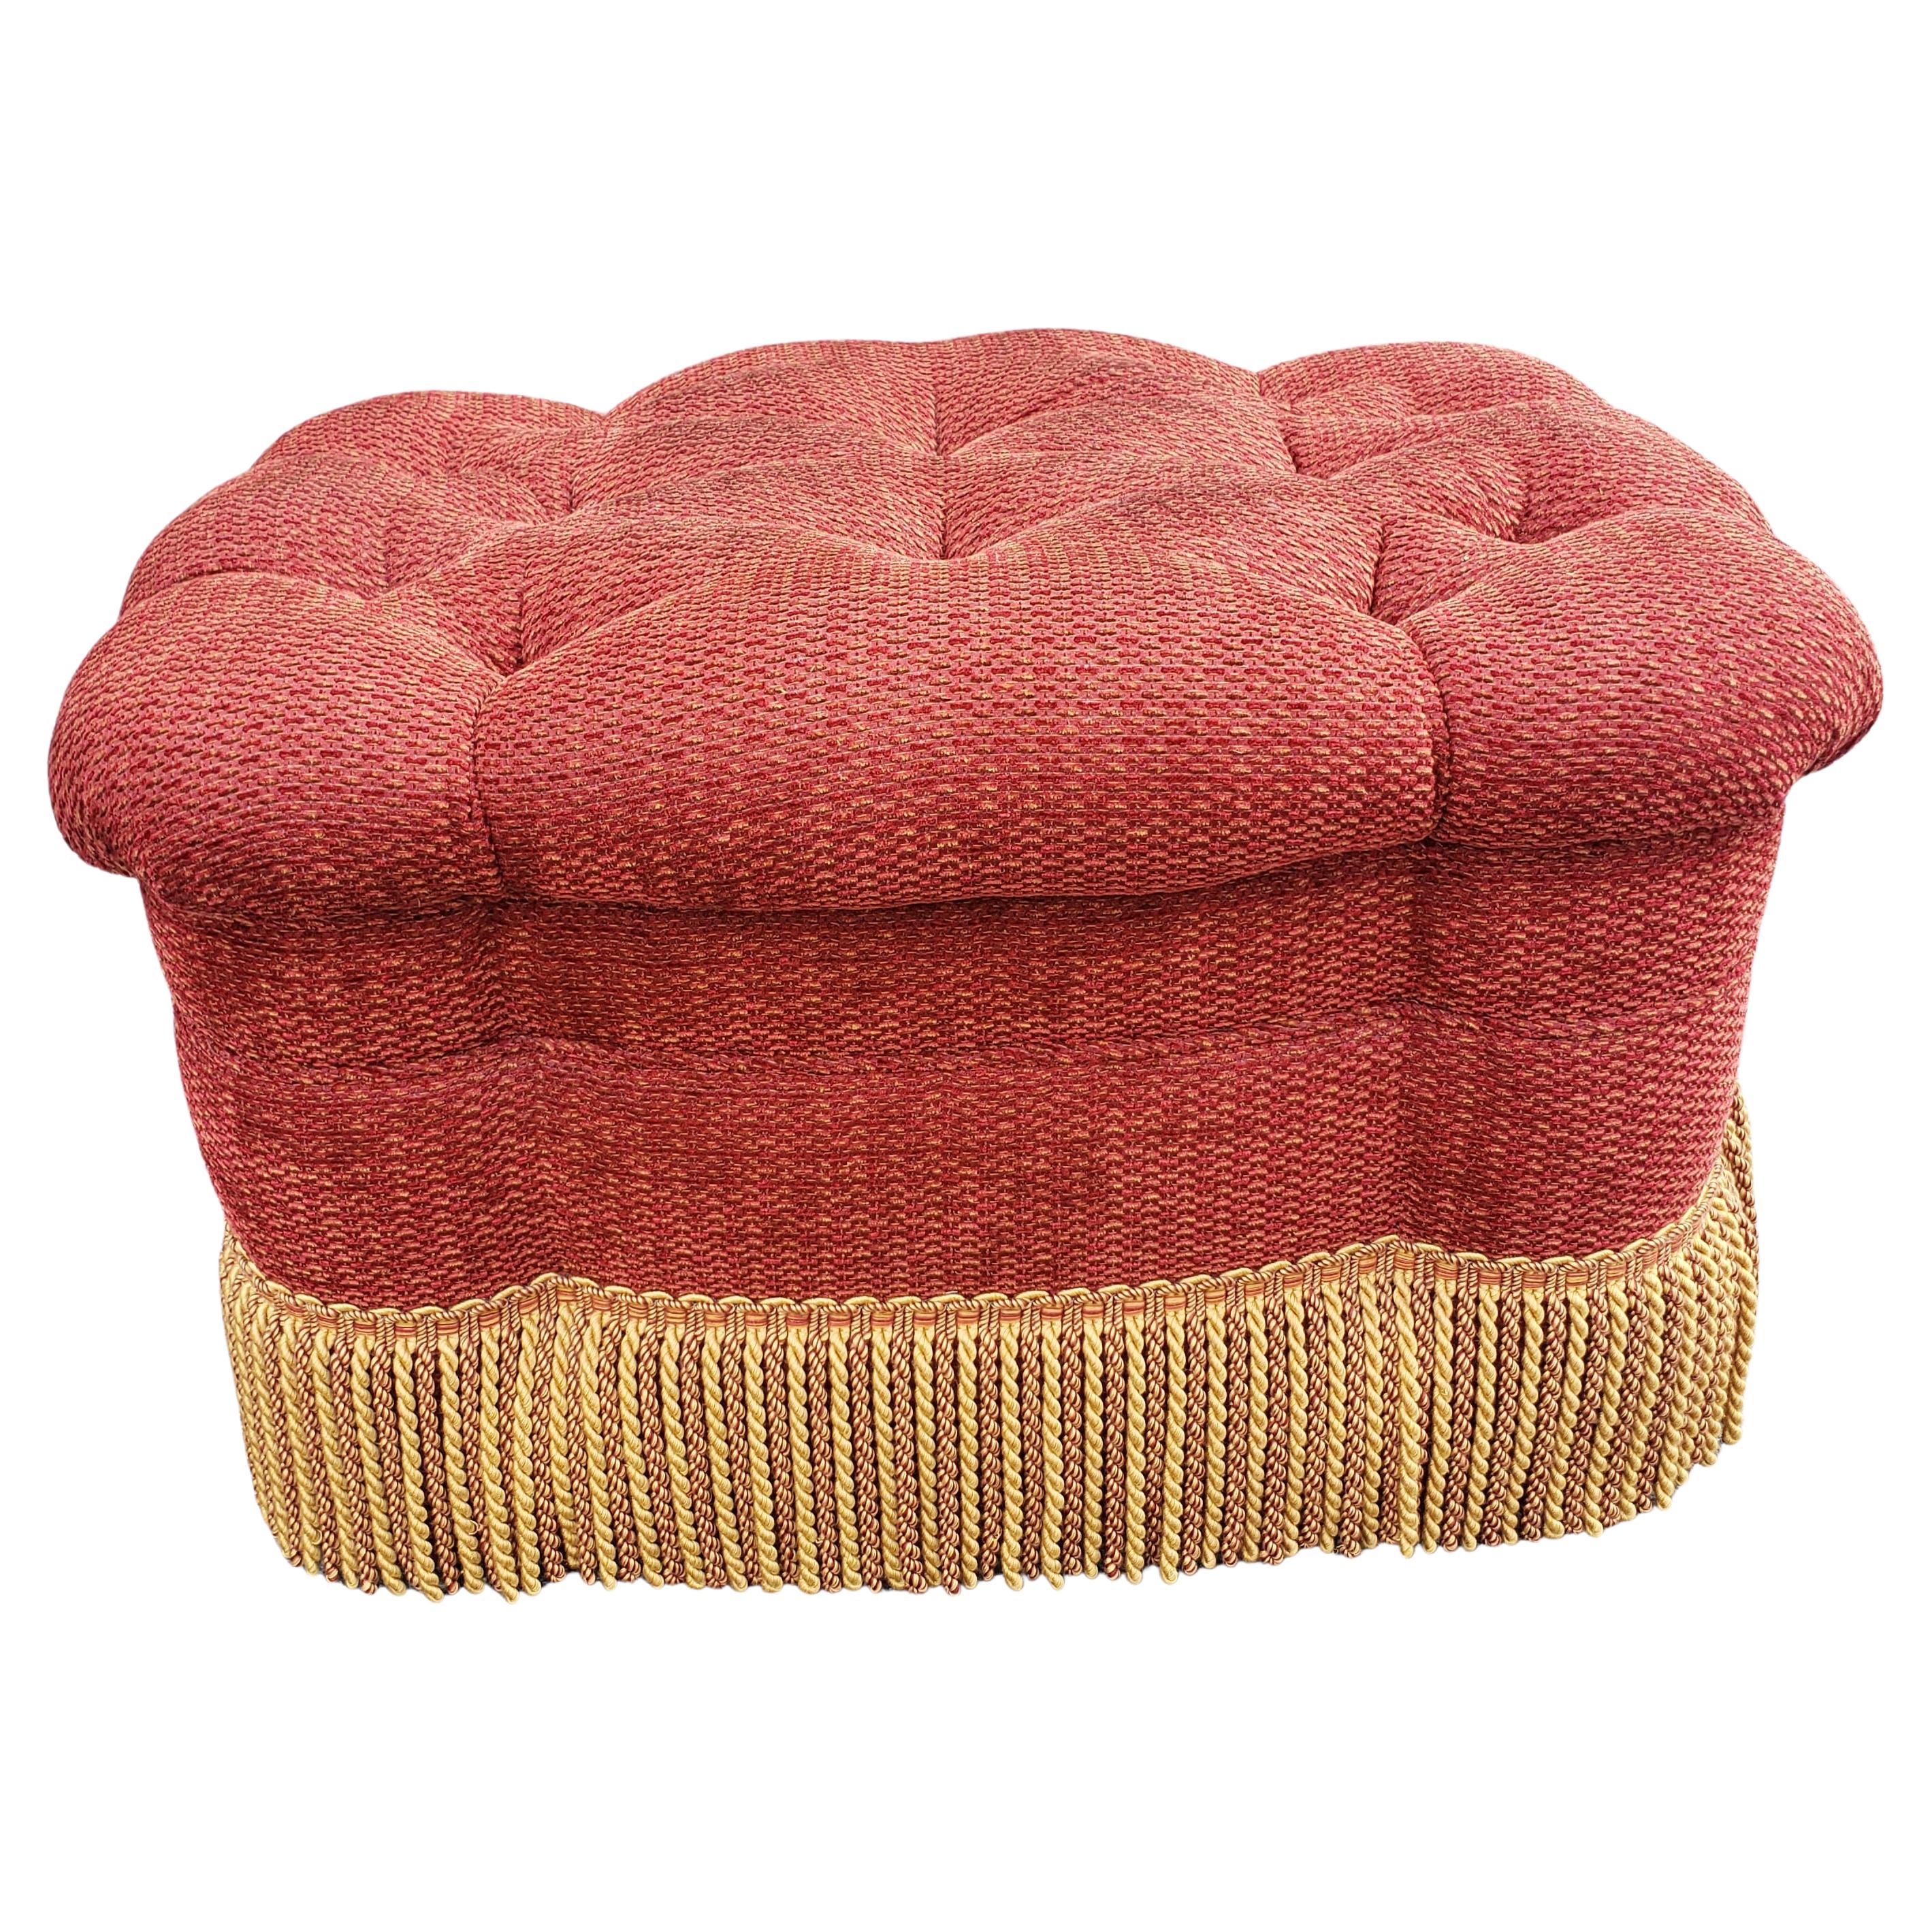 A Custom Made Rolling Upholstered and Tufted Ottoman with Fringes by Edward Springs.
Measures 29